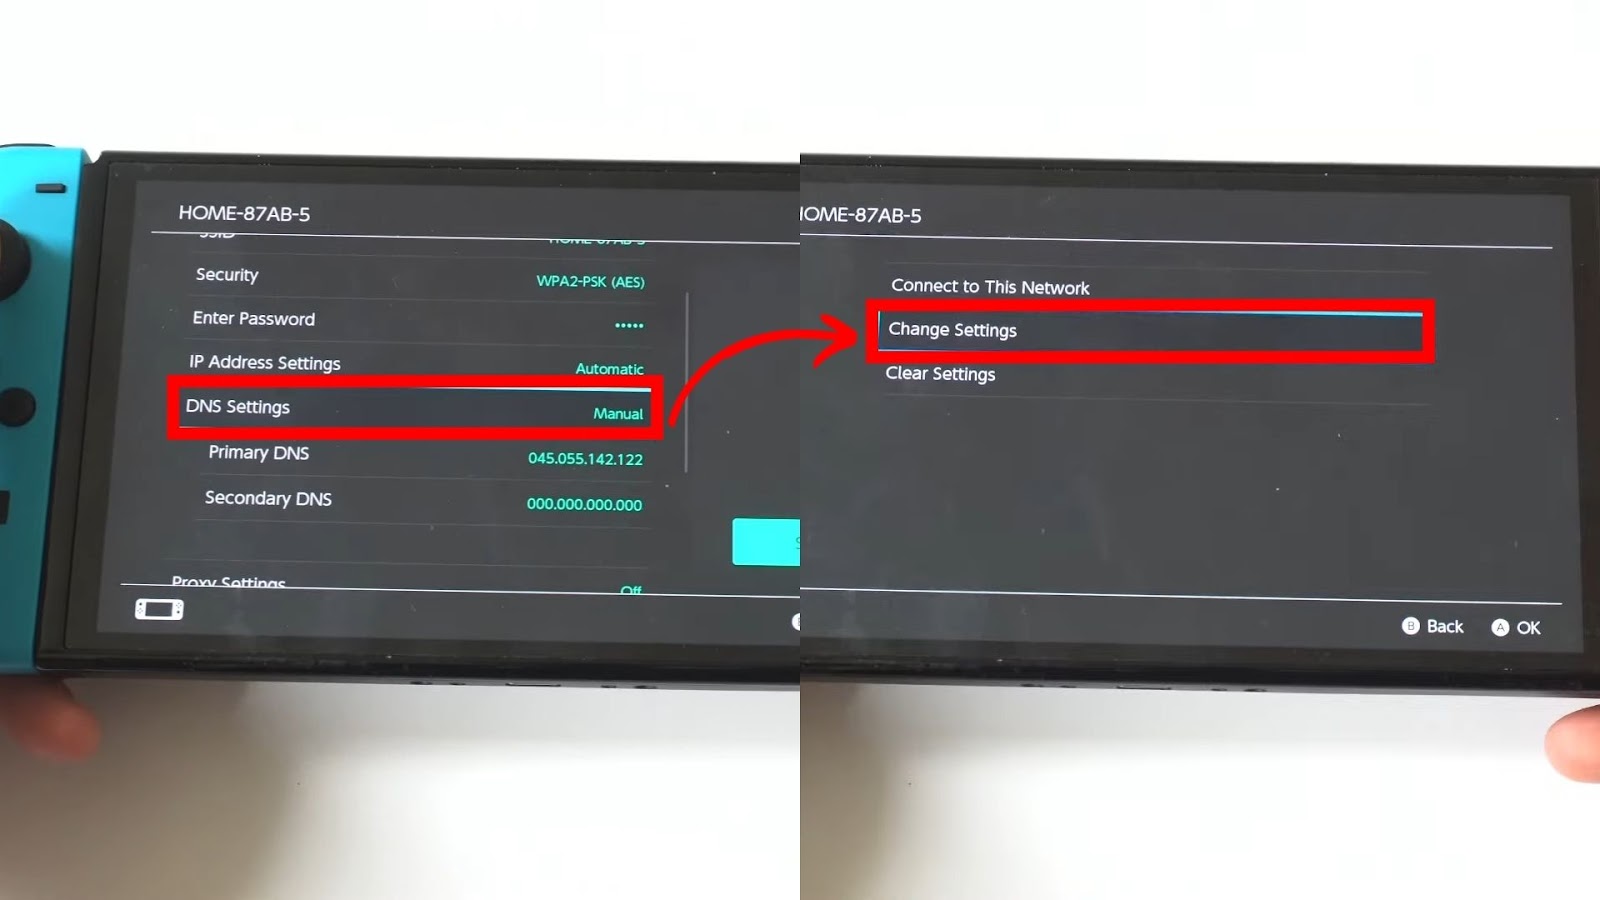 Disney Plus on Switch DNS Settings to Manual